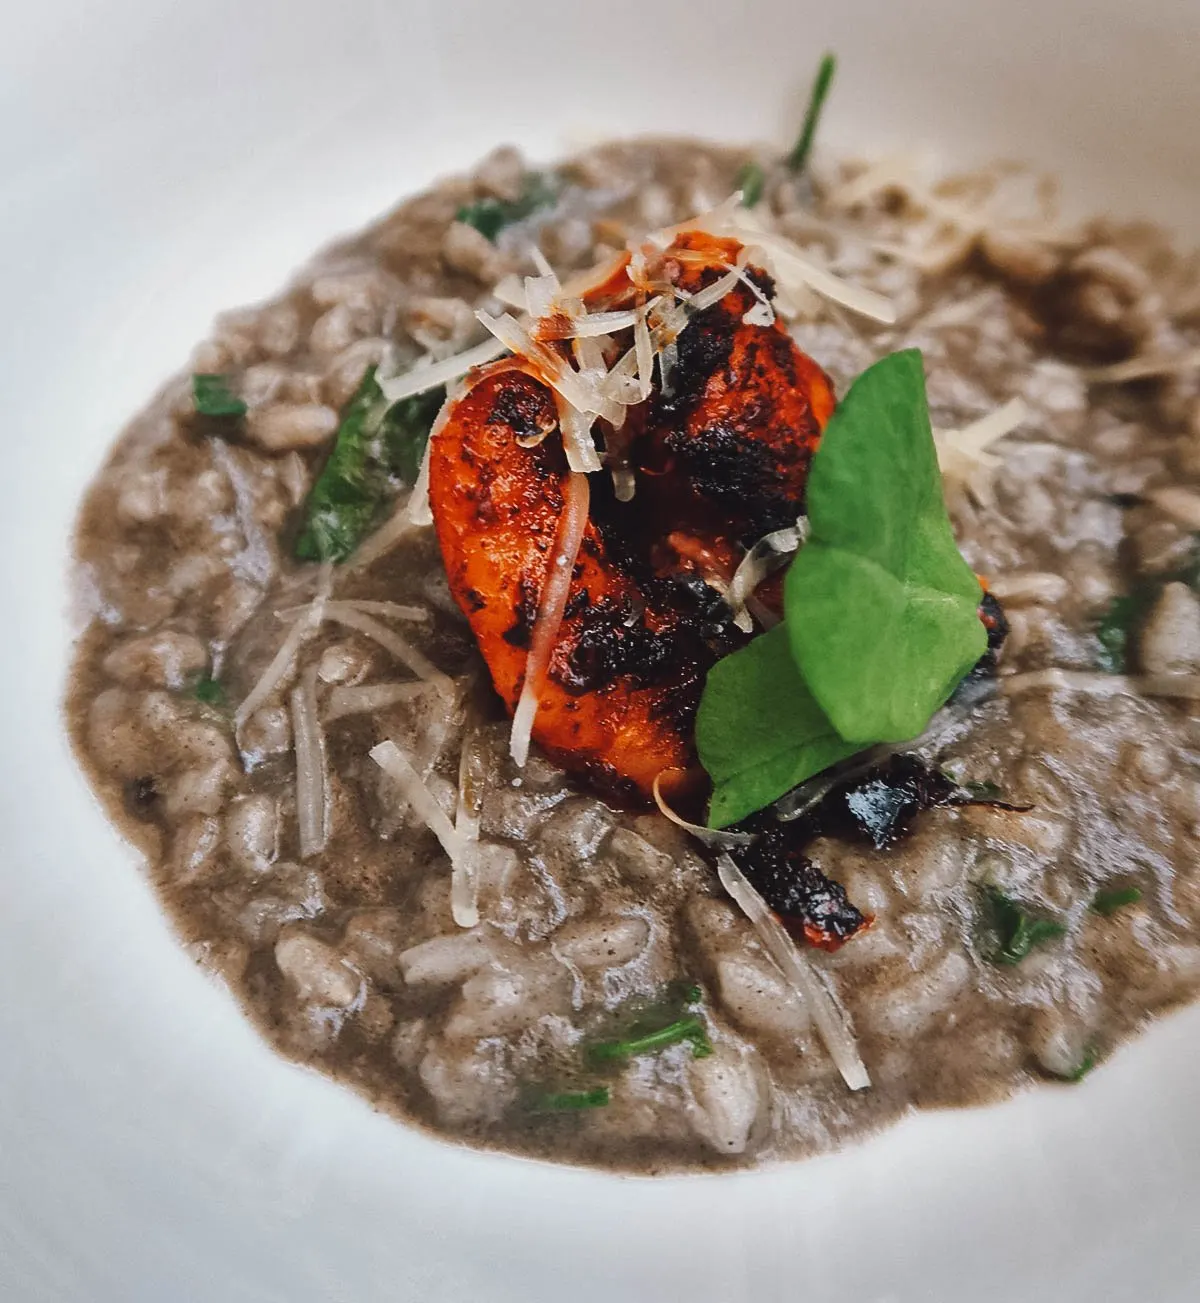 Huitlacoche risotto from the Colonia Roma tour